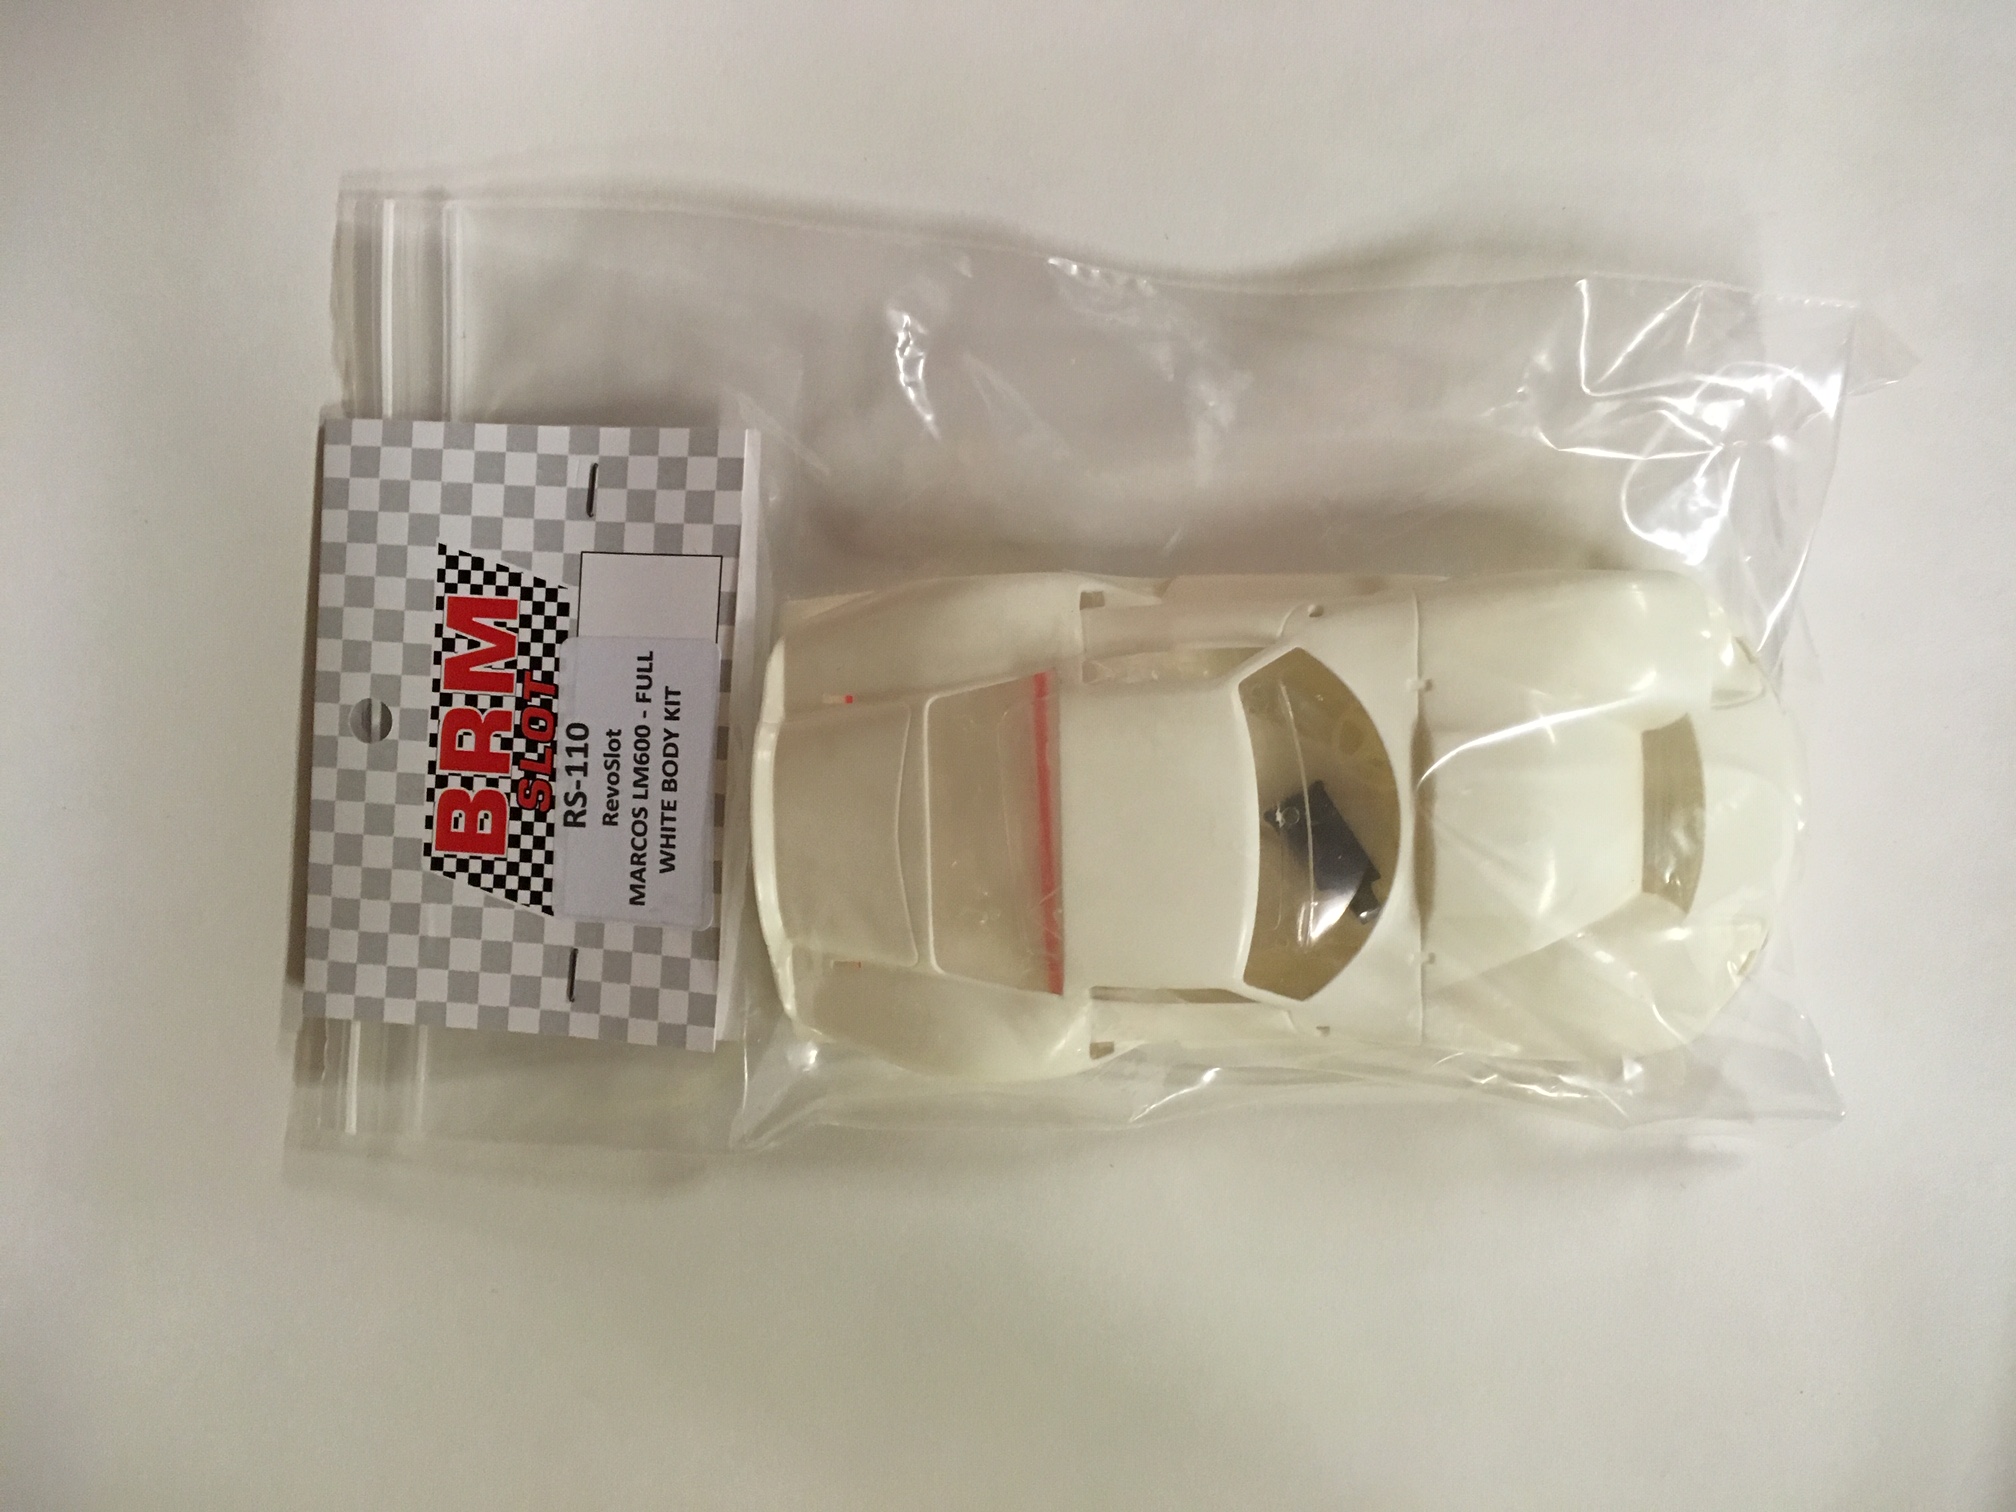 RS-110 1:32 scale Marcos LM600 White body kit